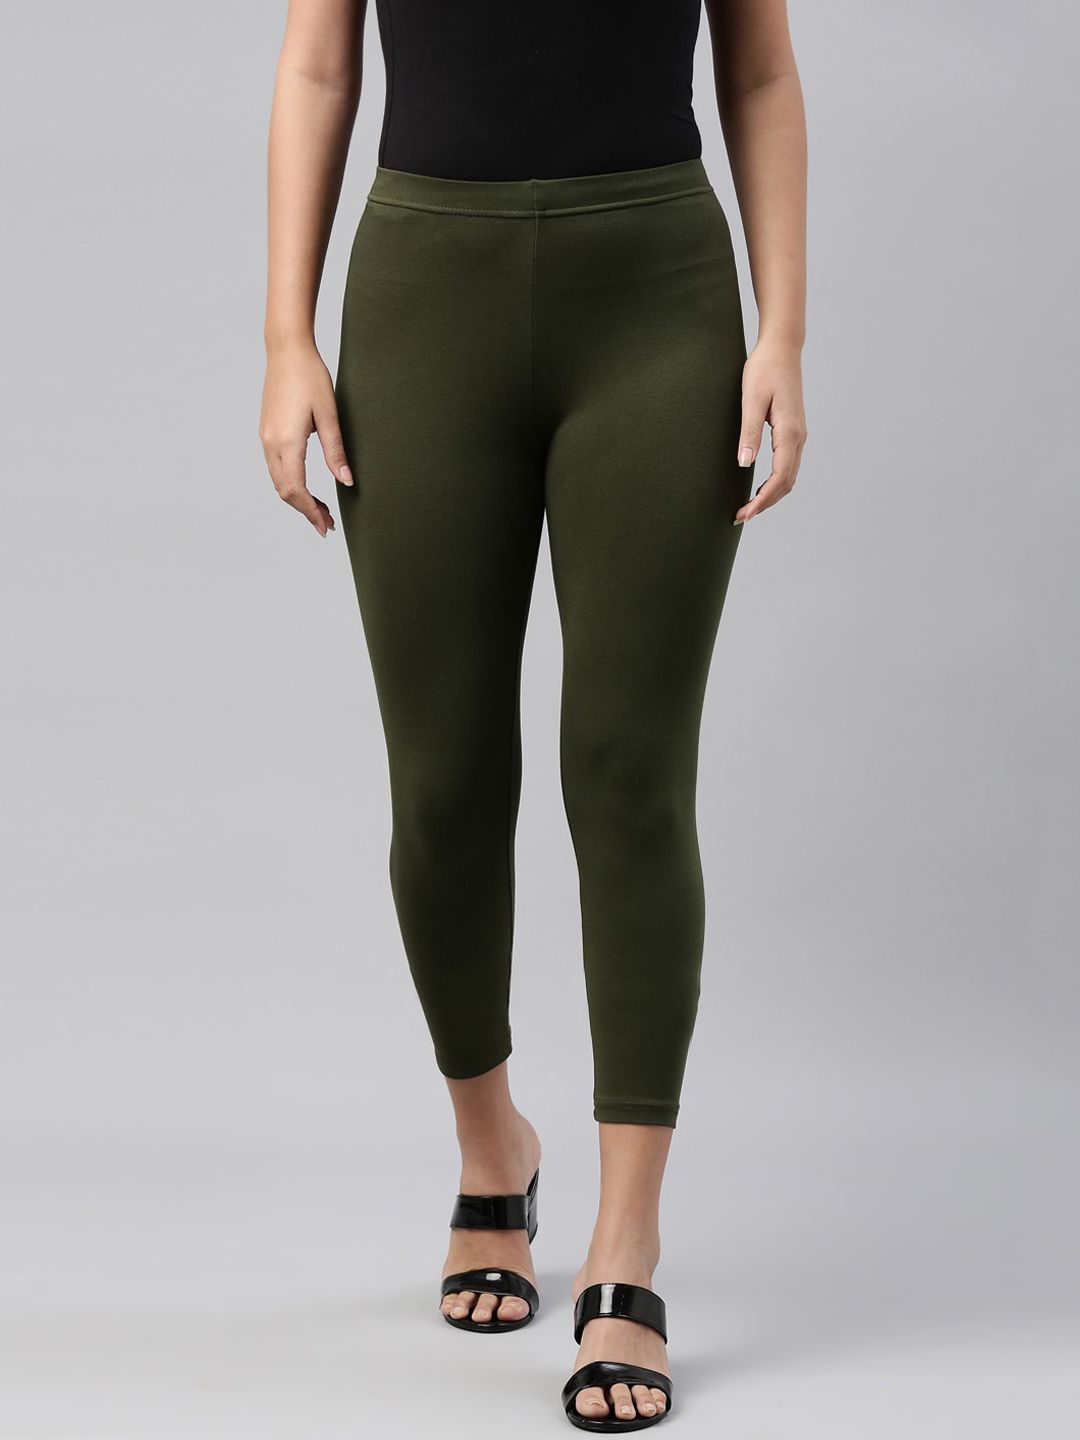 Go Colors Women Olive Green Solid Cotton Three-Fourth-Length Leggings Price in India